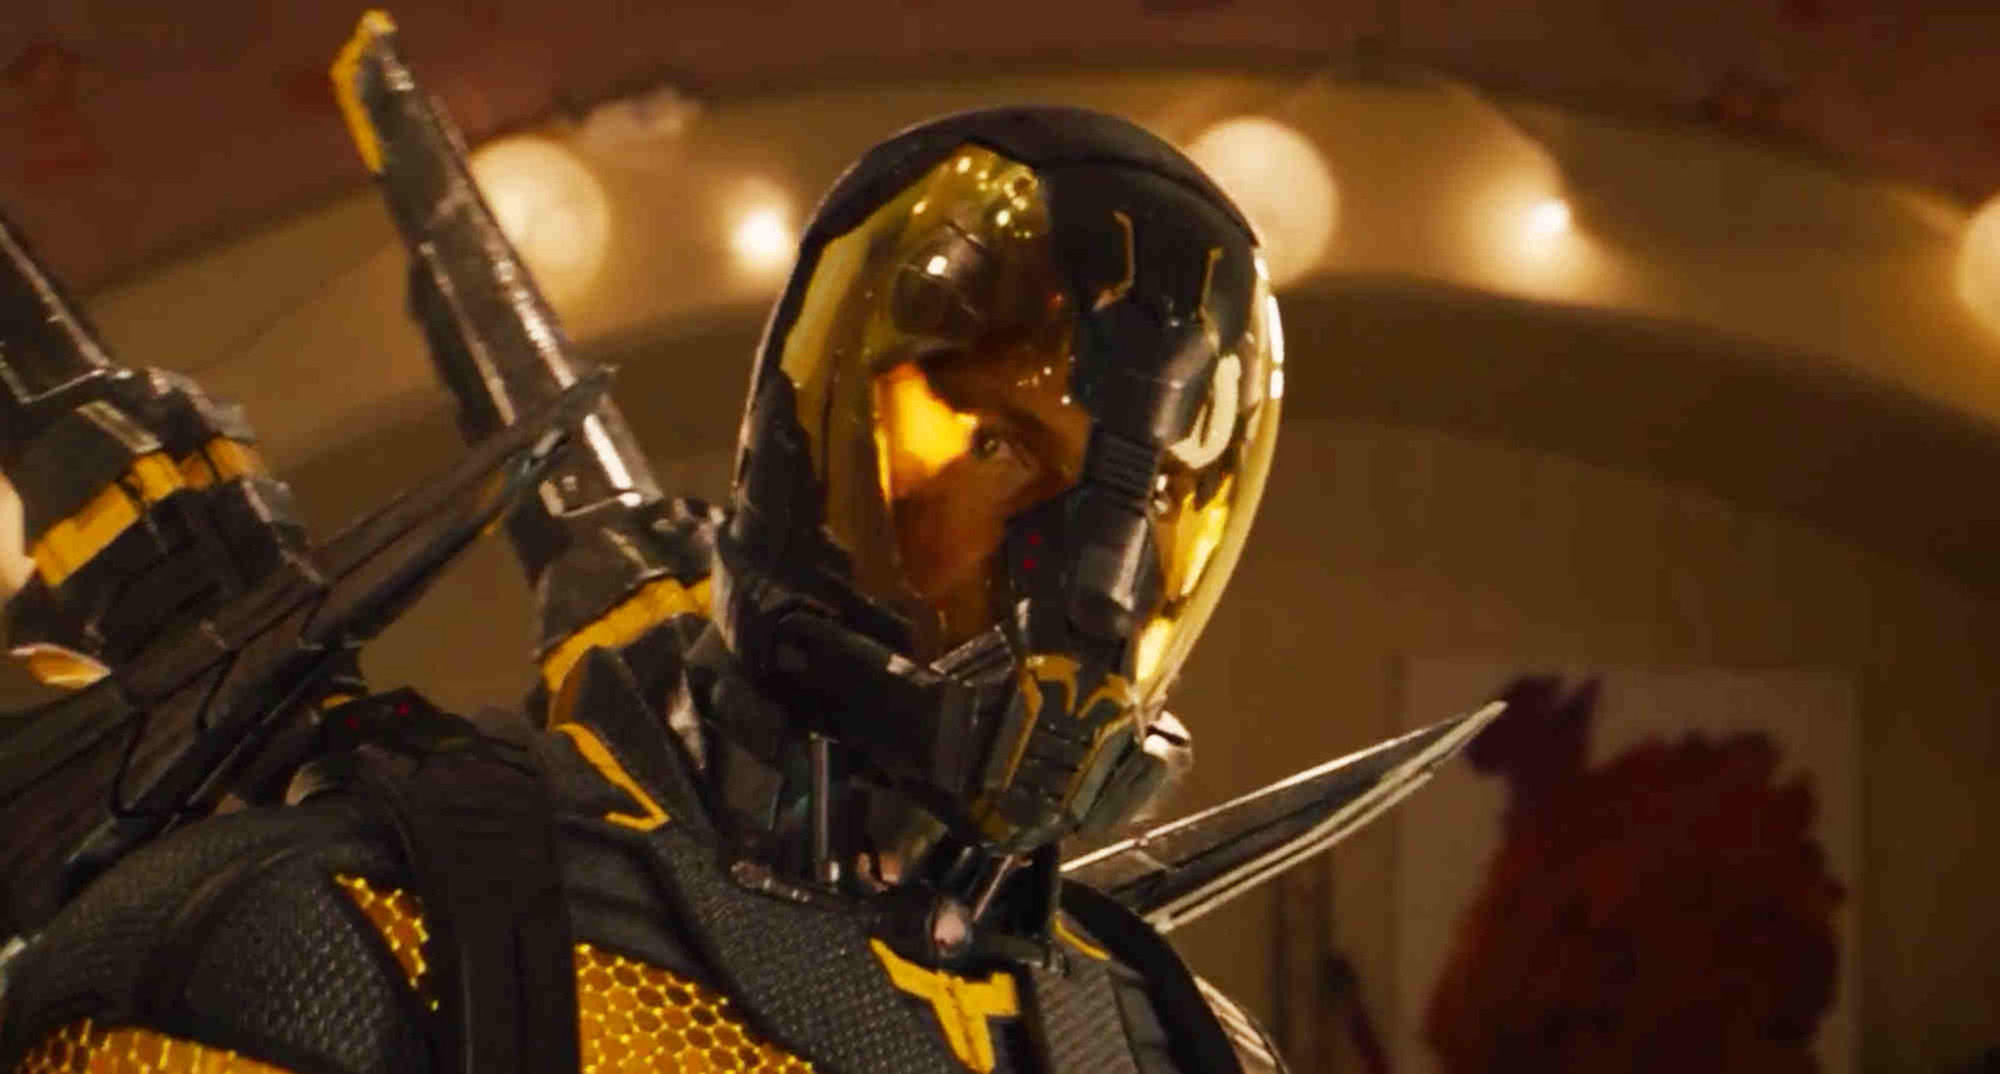 First Full Look At Actor Corey Stoll In Action As Yellowjacket The